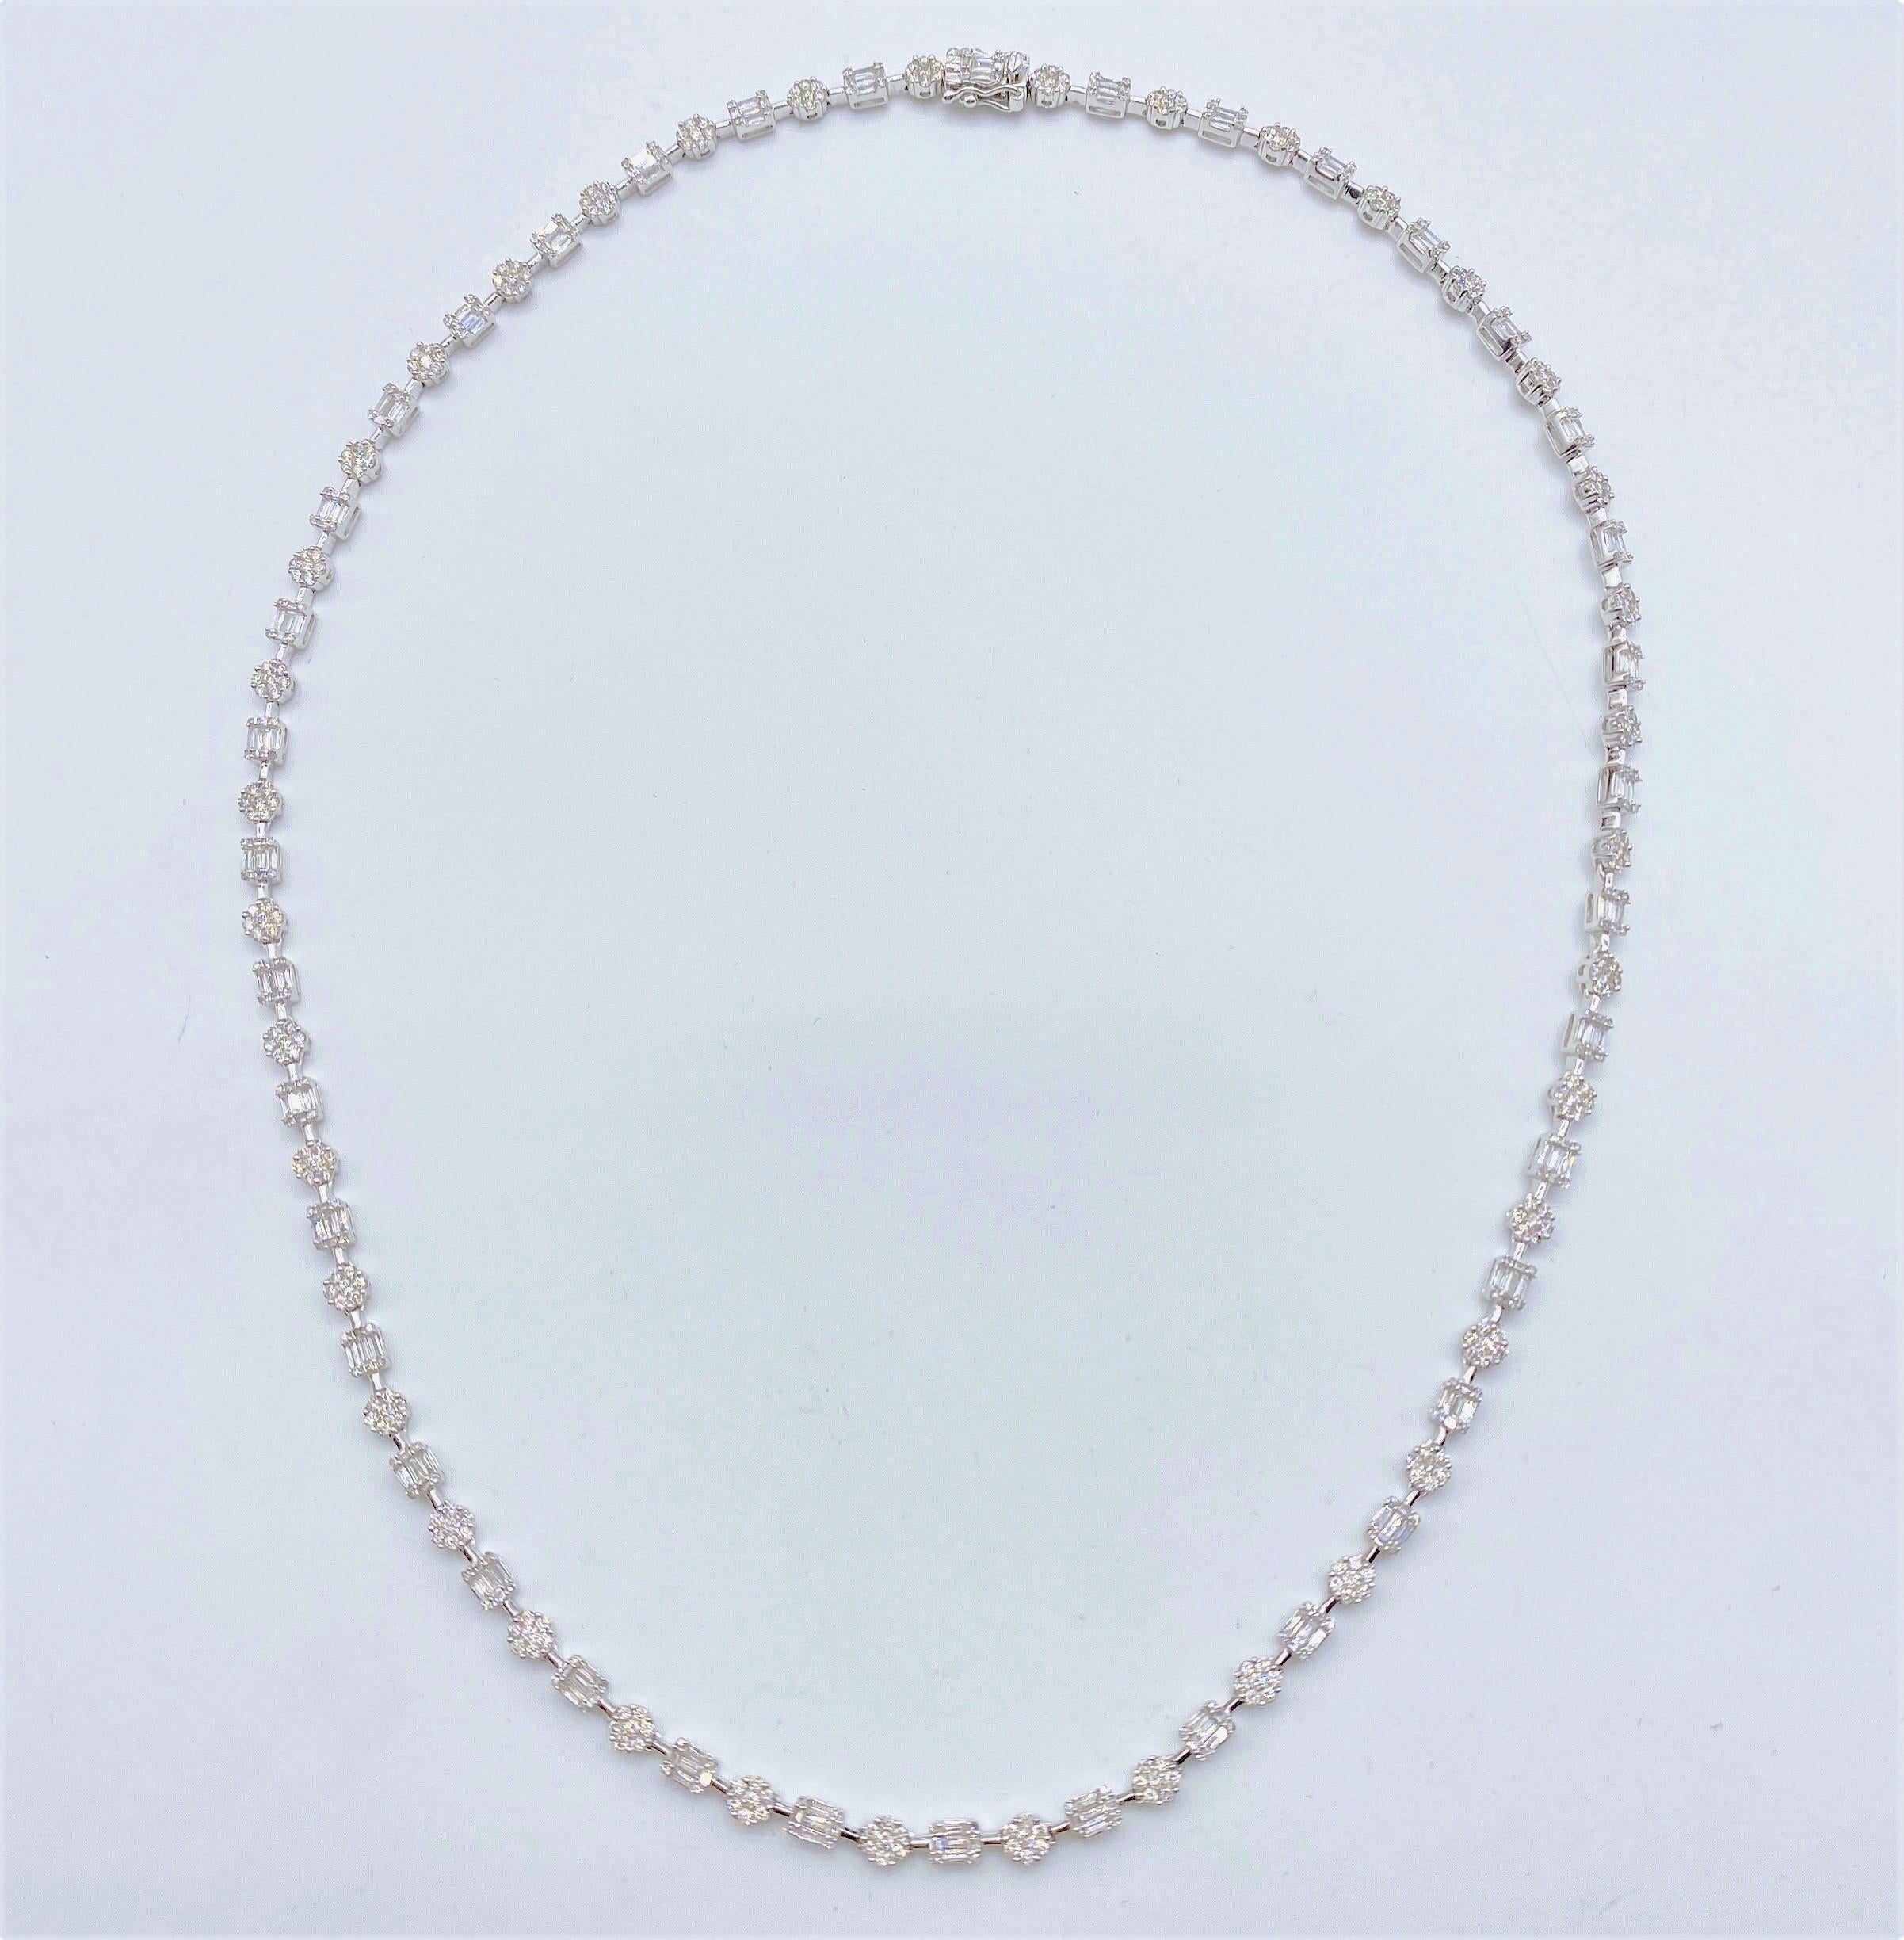 The Following Item we are offering is this Rare Important 18KT GOLD FANCY CUT DIAMOND STRAND NECKLACE!!! Necklace consists of Exquisite Fancy Baguette and Round Cut Diamonds set in 18KT Gold!! Total Carat Weight approx 4CTS!!! An Absolute Brilliant